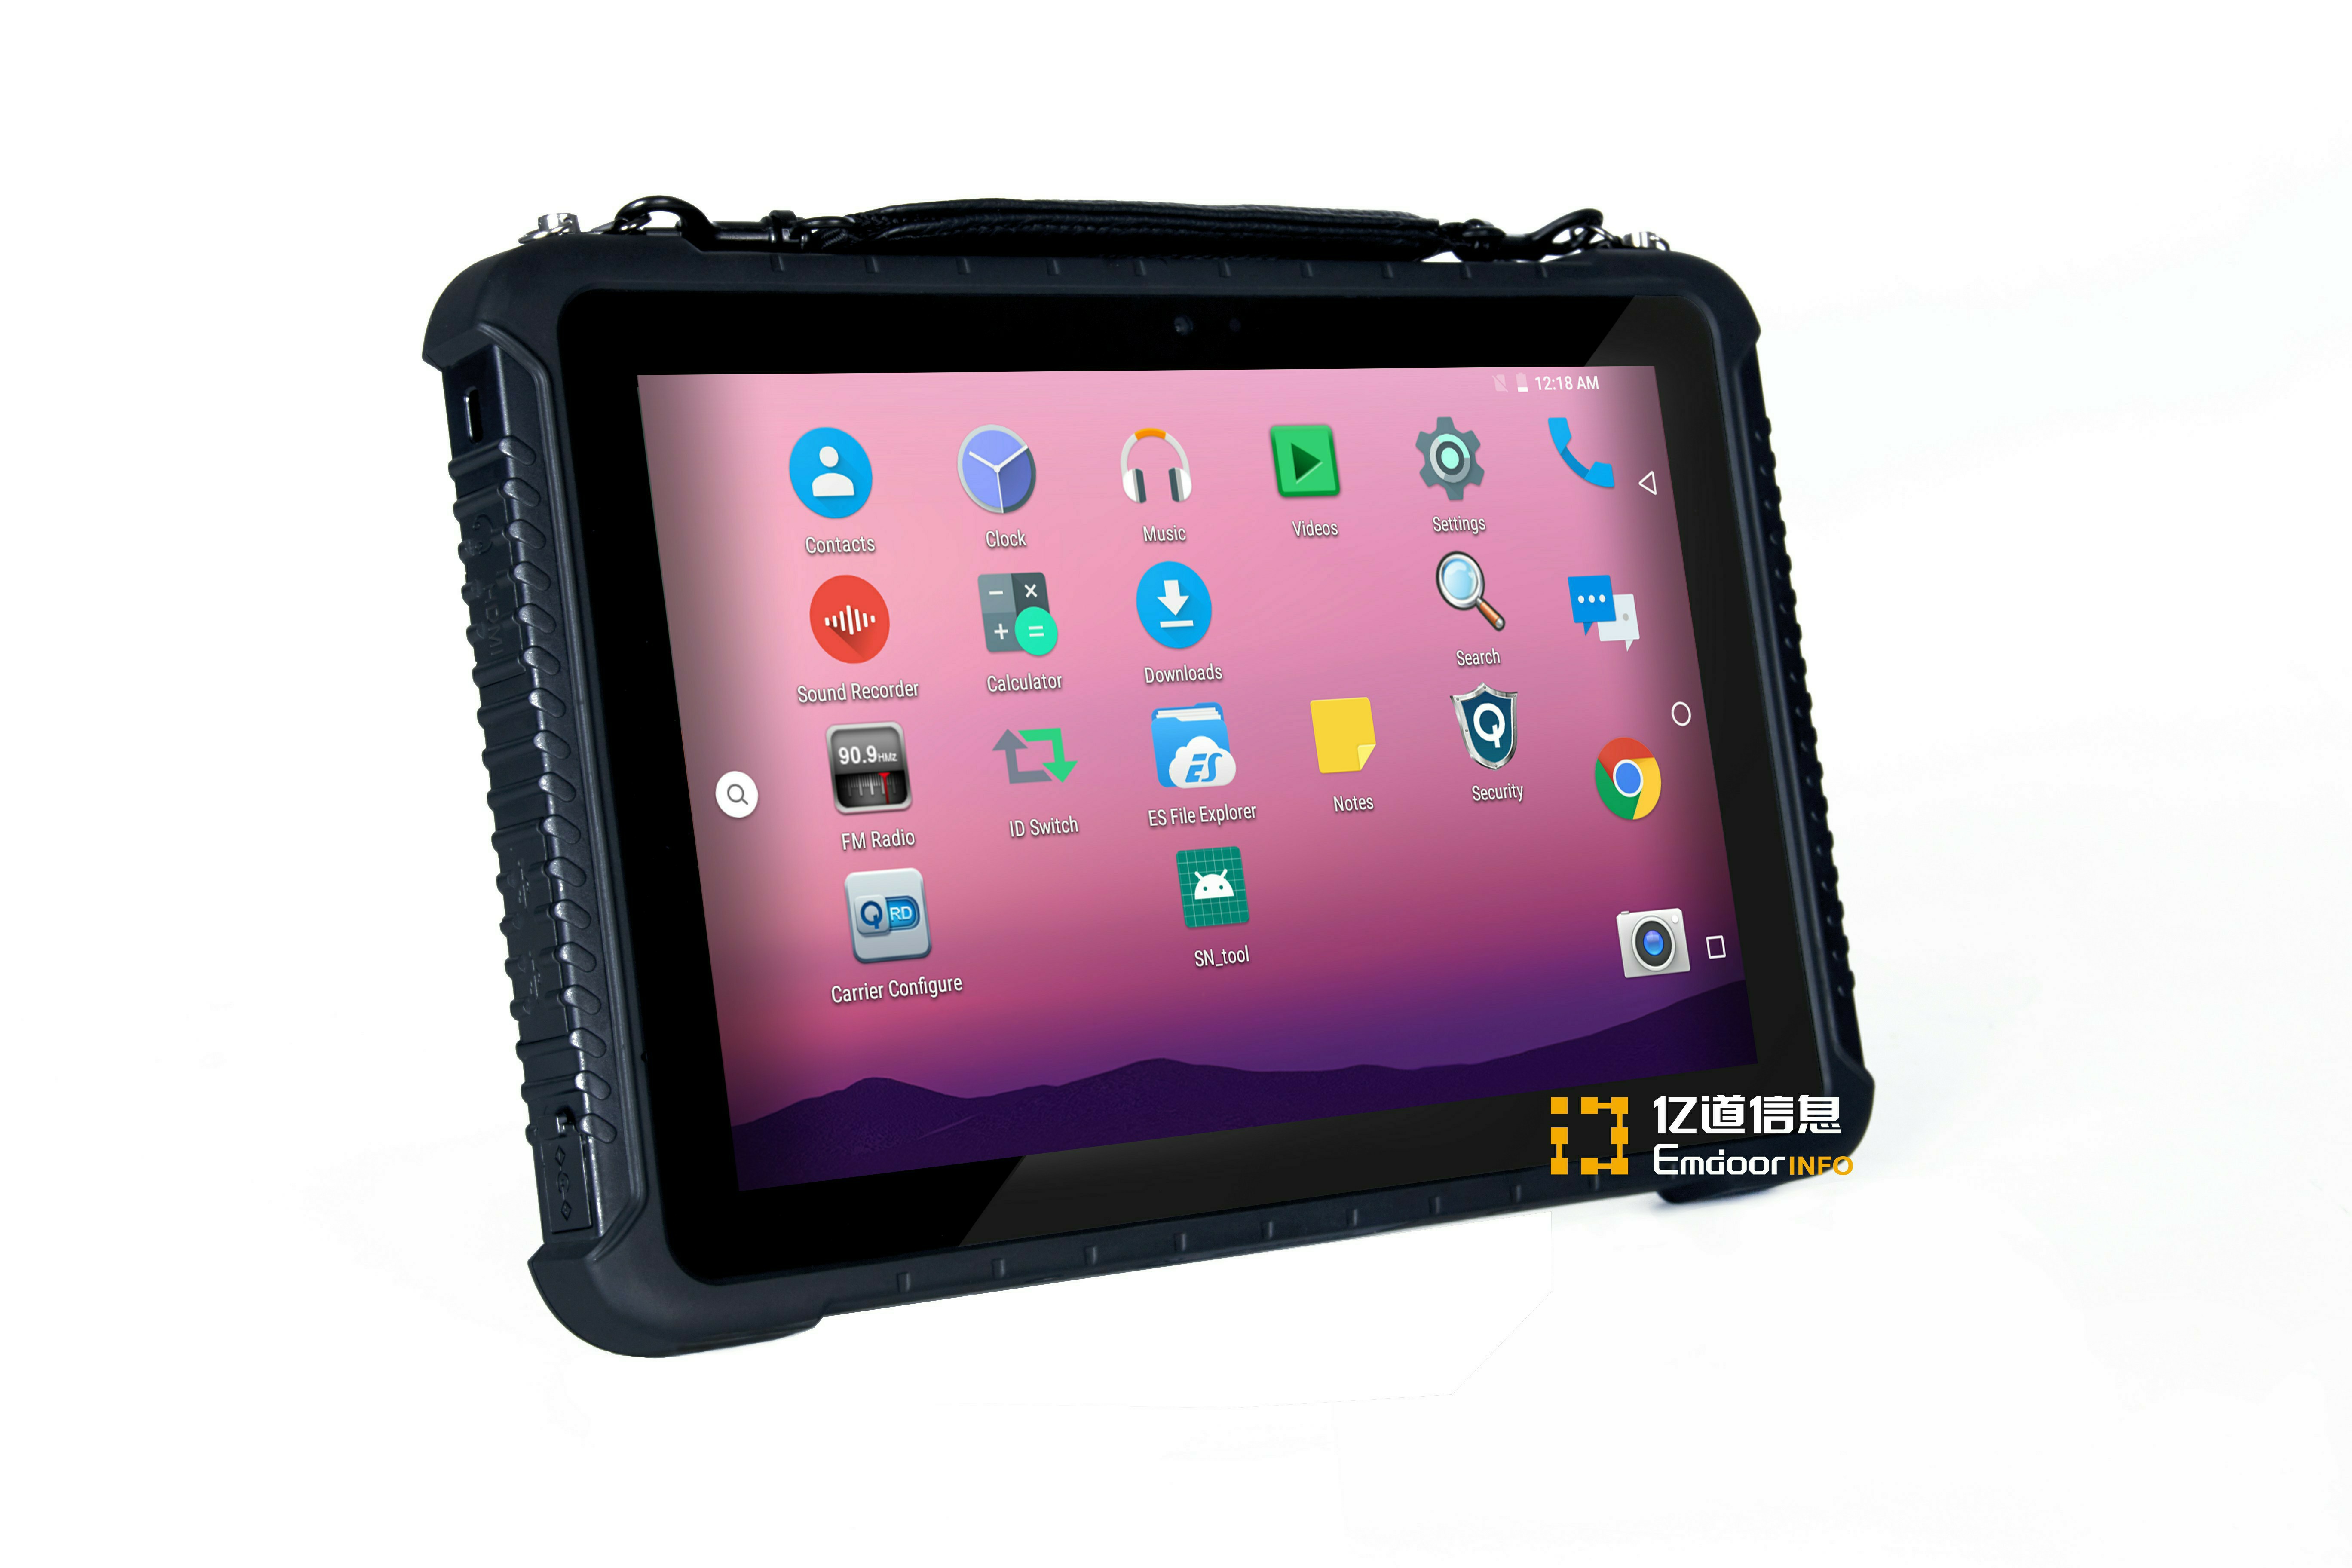 10.1 inch Android Rugged Tablet EM-Q16